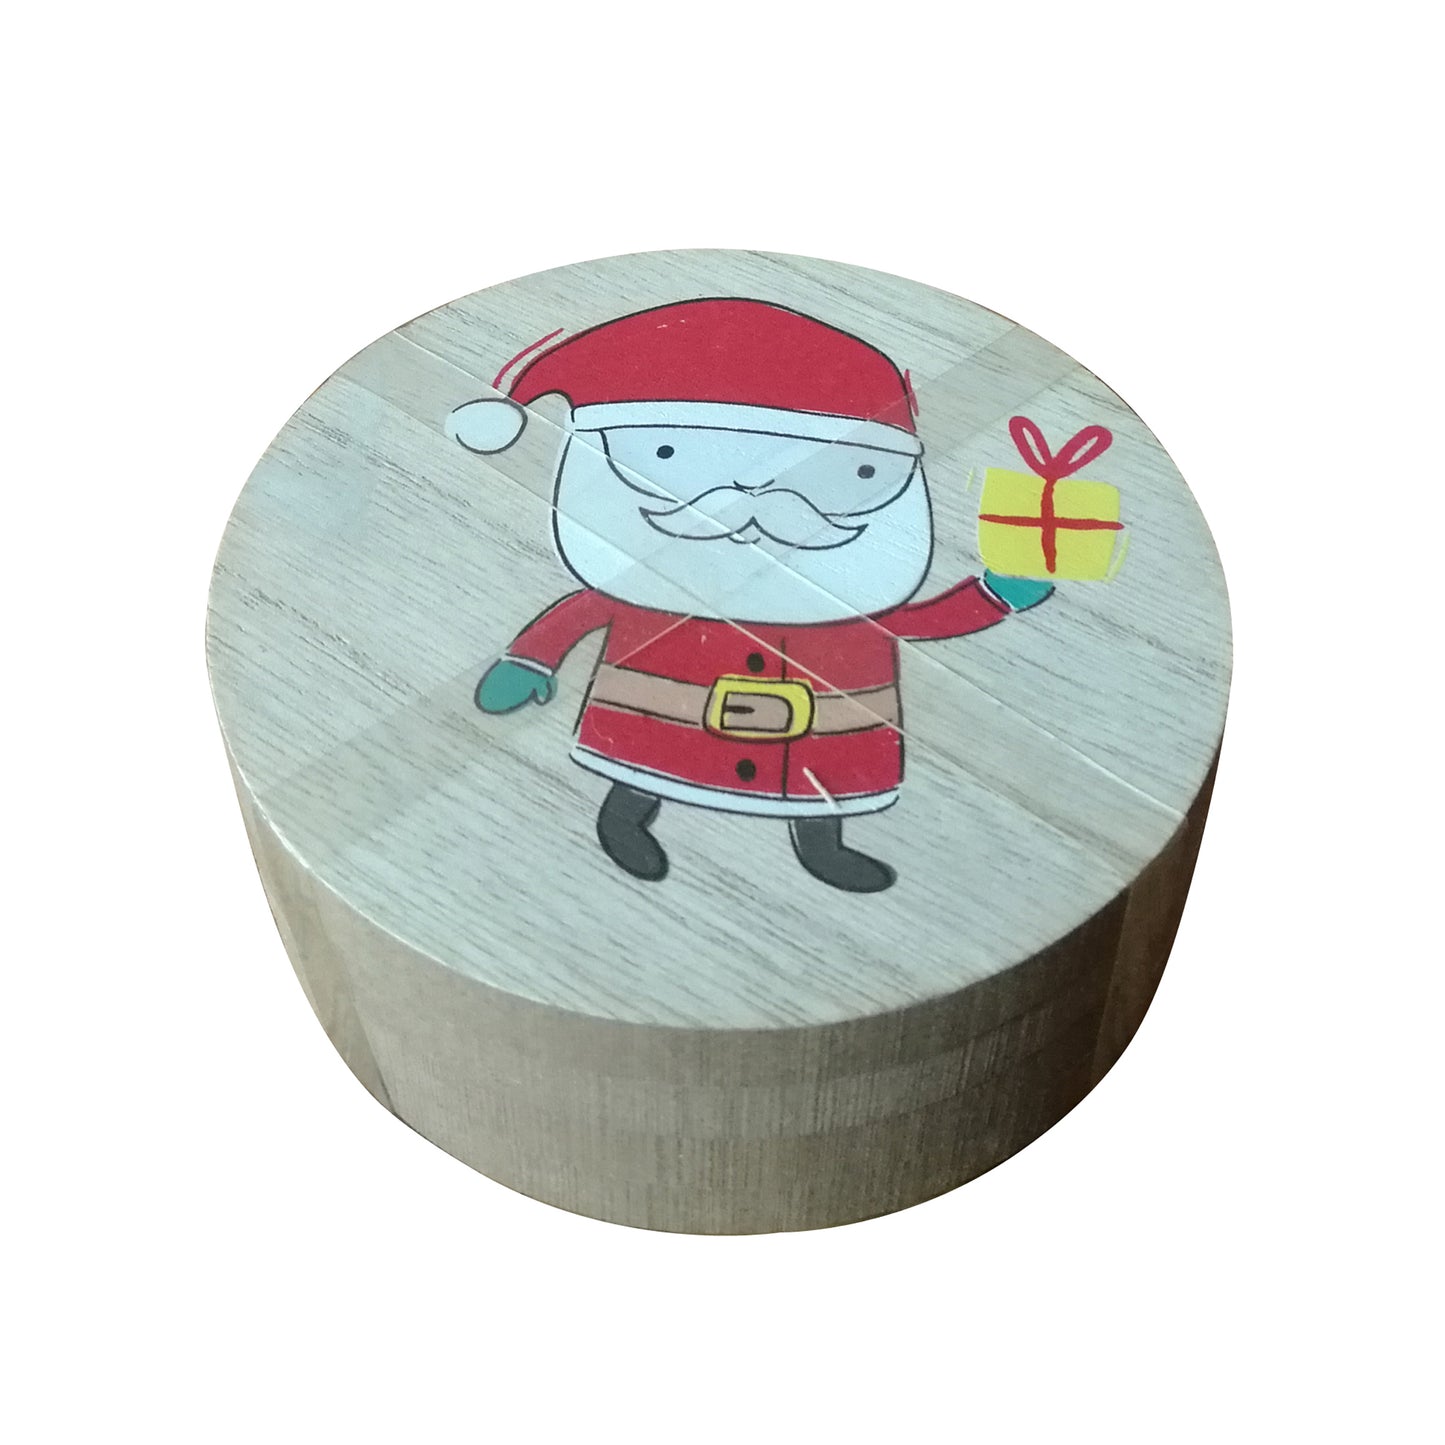 CVHOMEDECO. Santa Claus and Reindeer Wood Natural Bark Coaster Set, 2xSanta Claus Coasters+2xReindeer Coasters Tied Off with a Rubber Band, 4 Inch, Set of 4.